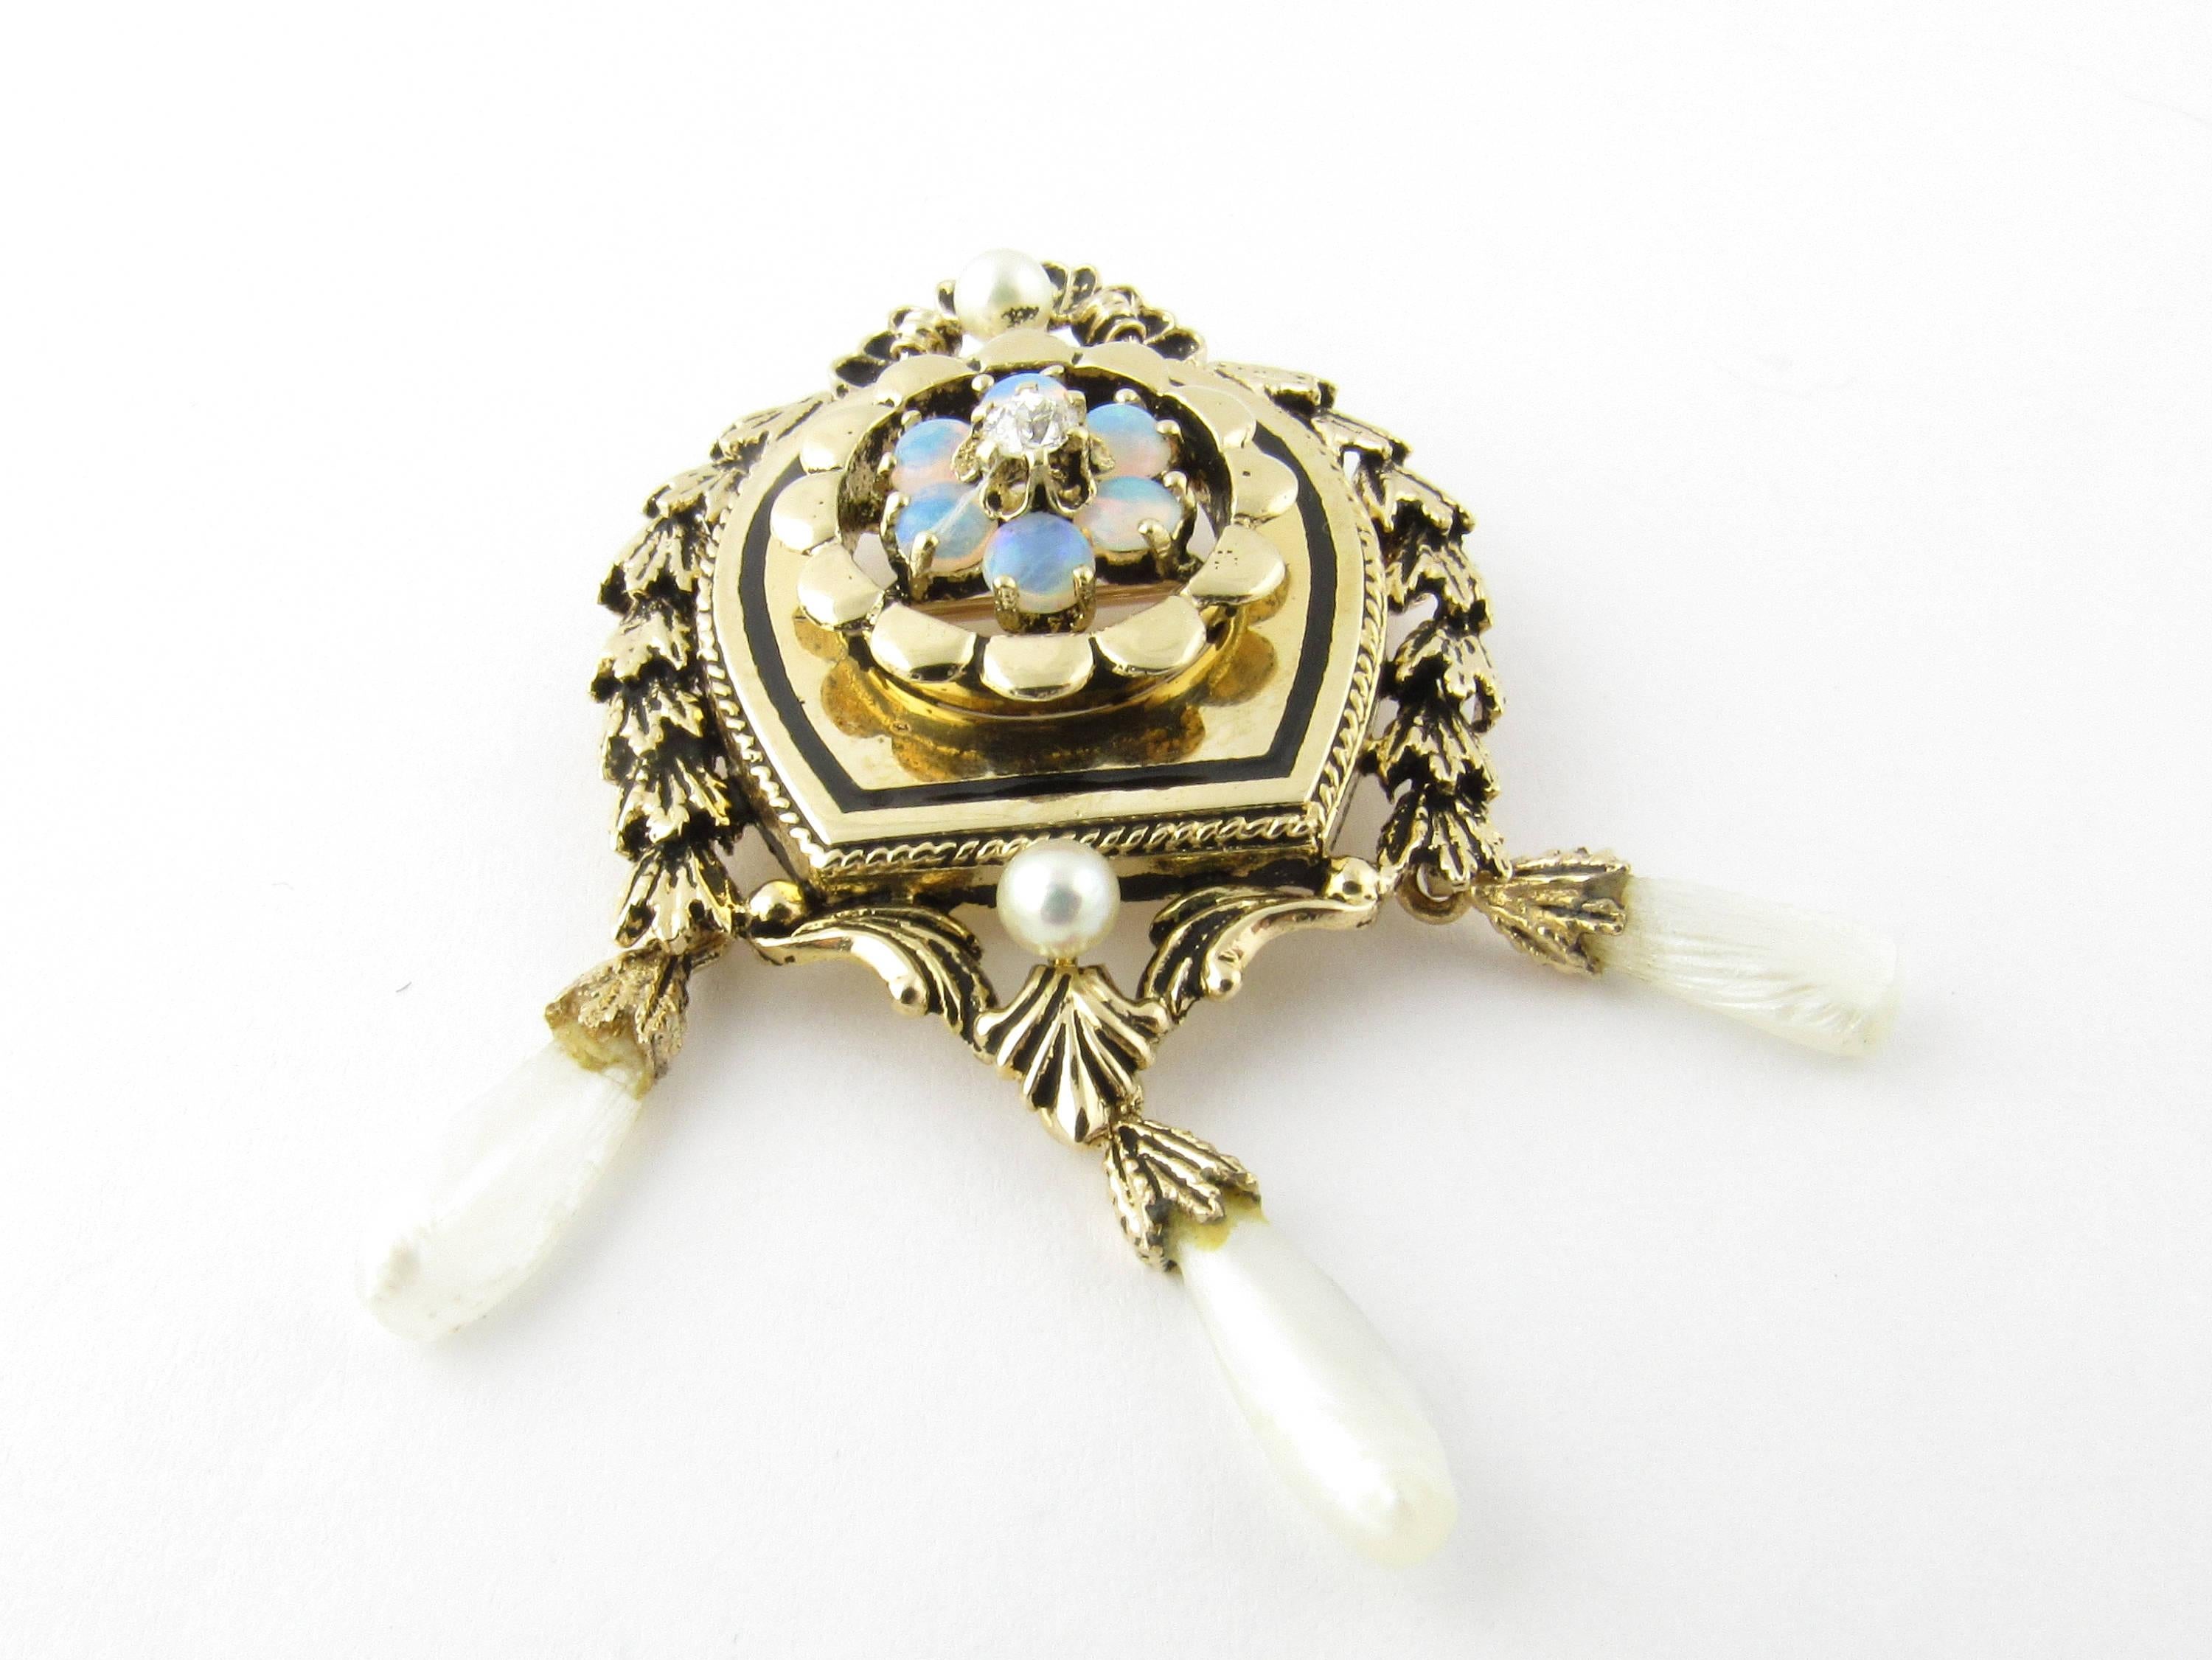 Antique Yellow Gold Opal and Pearl Brooch/Pendant- 
This beautifully crafted piece features exquisitely detailed 14K yellow gold accented with six opals, one old mine cut diamond and two cultured pearls. Three freshwater pearls dangle from bottom of